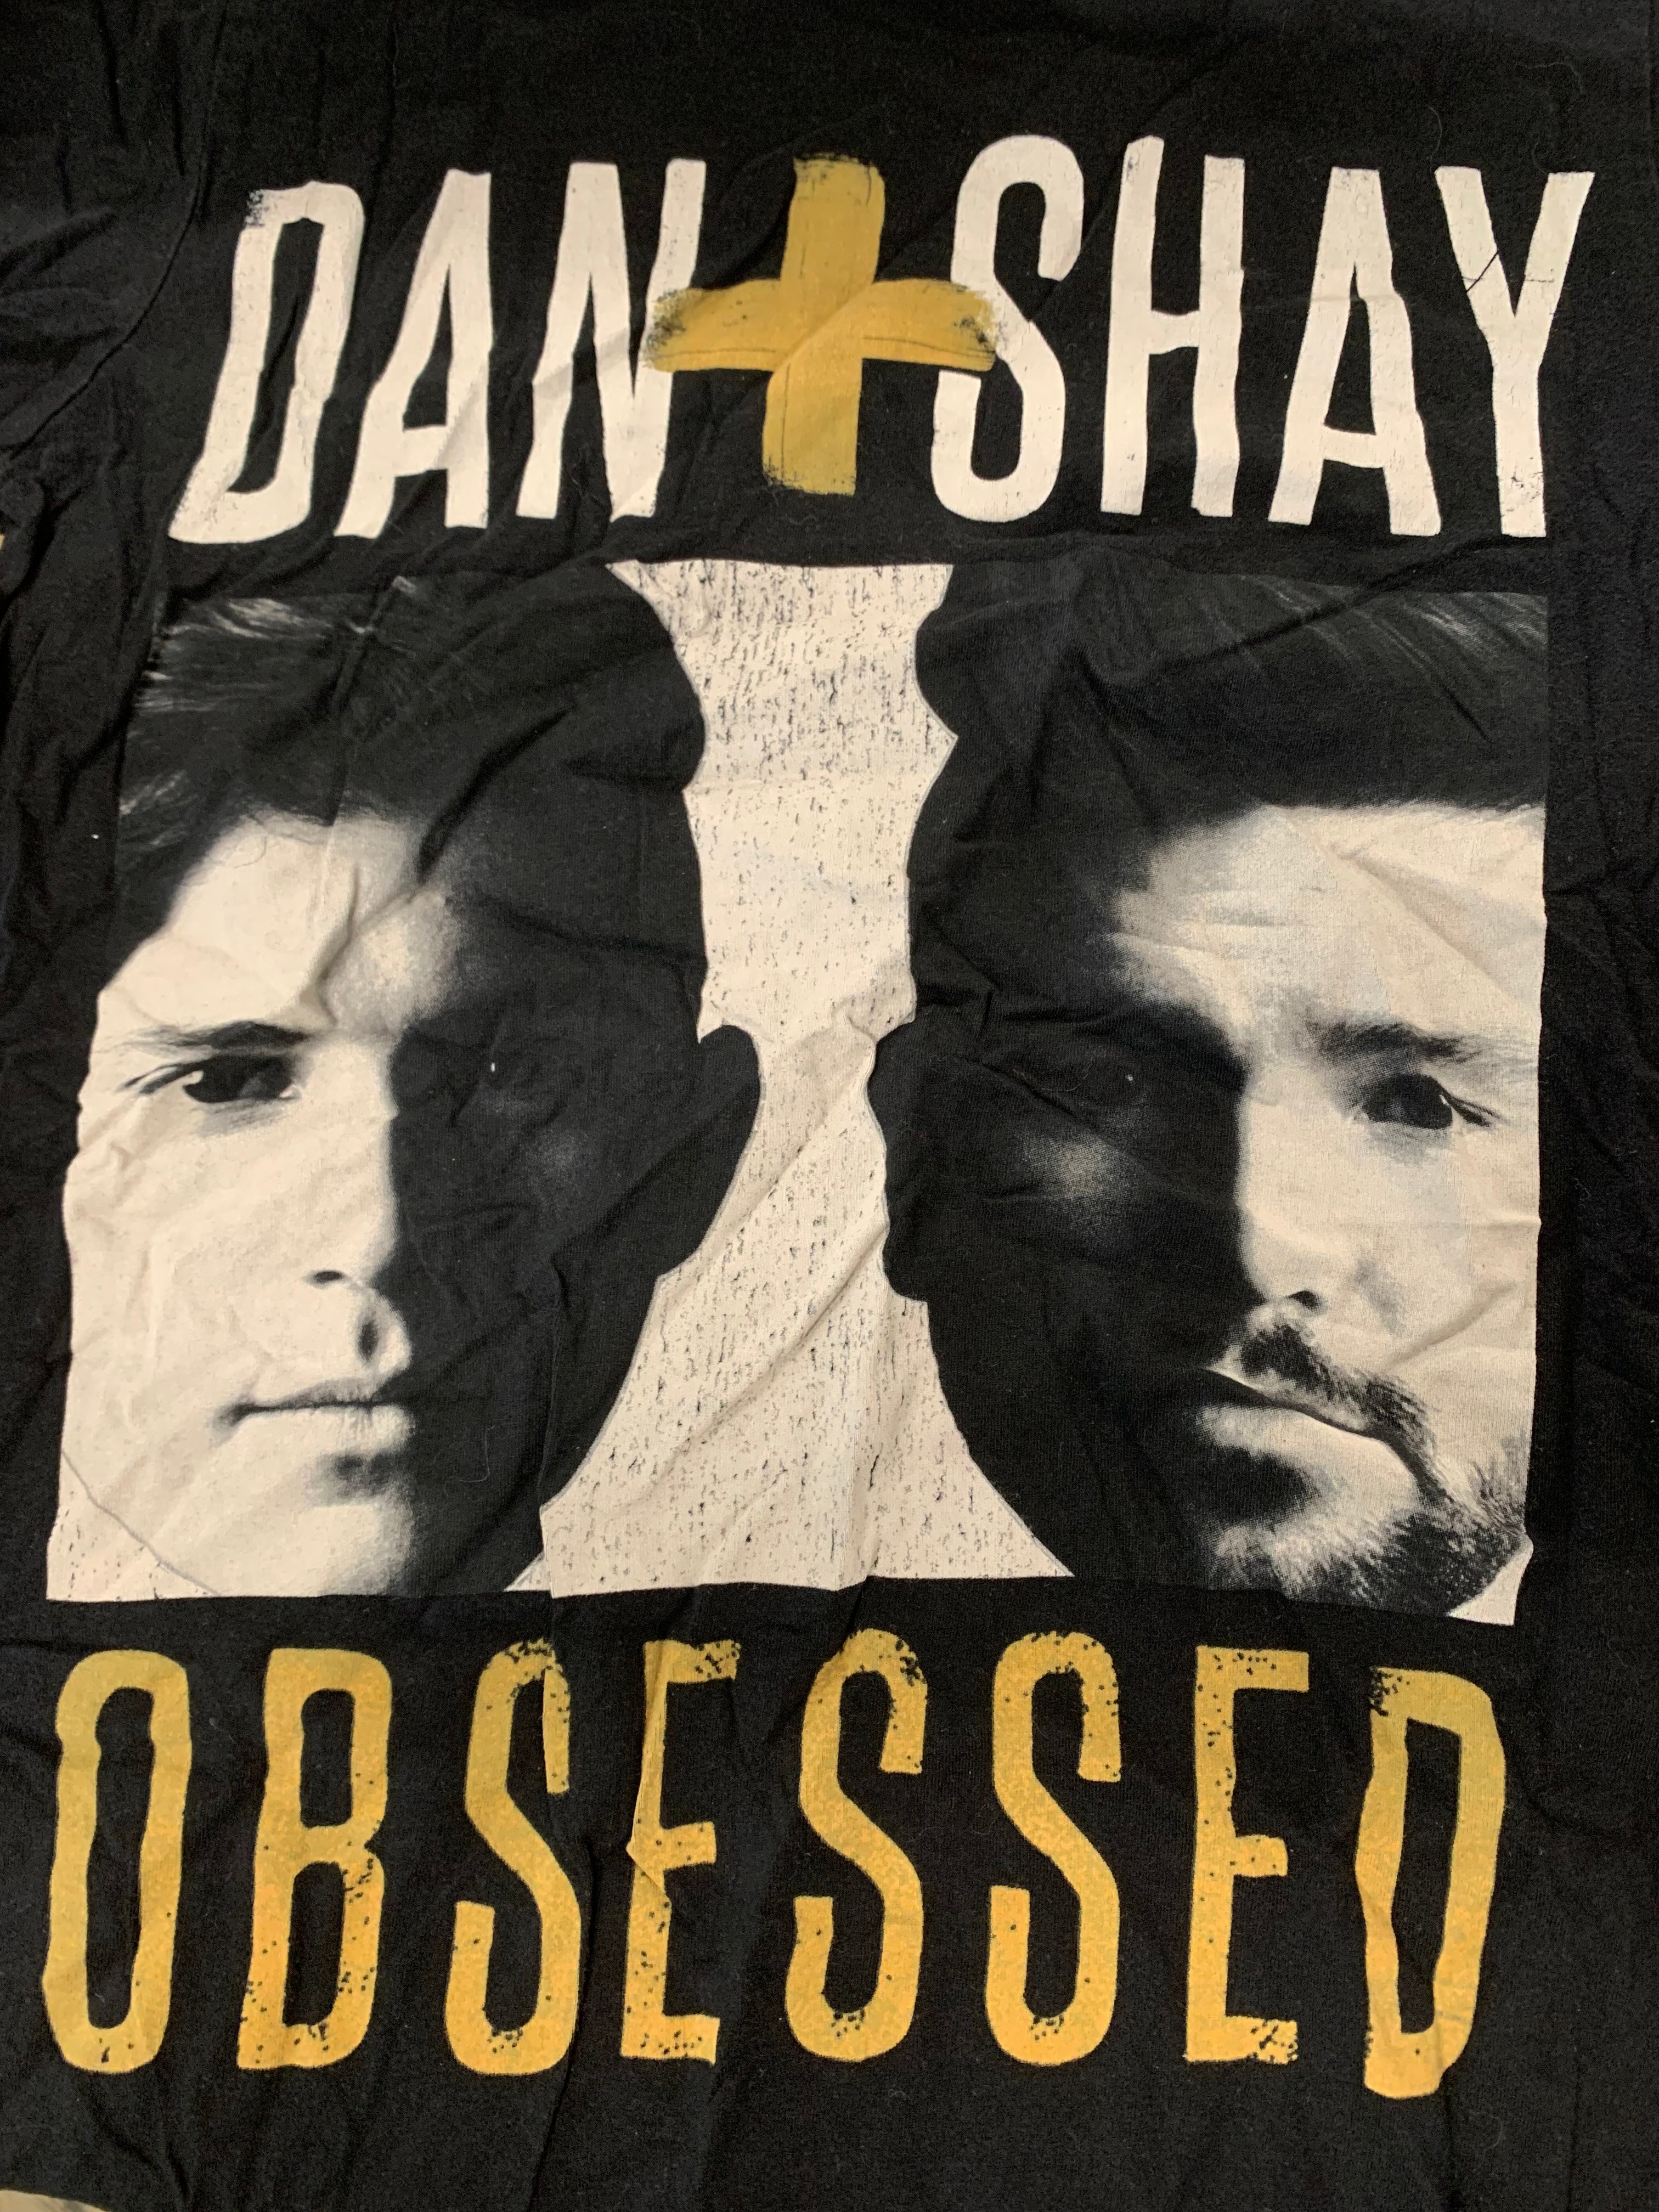 Dan And Shay 2016 Obsessed Tour T-Shirt, Black, Women's L